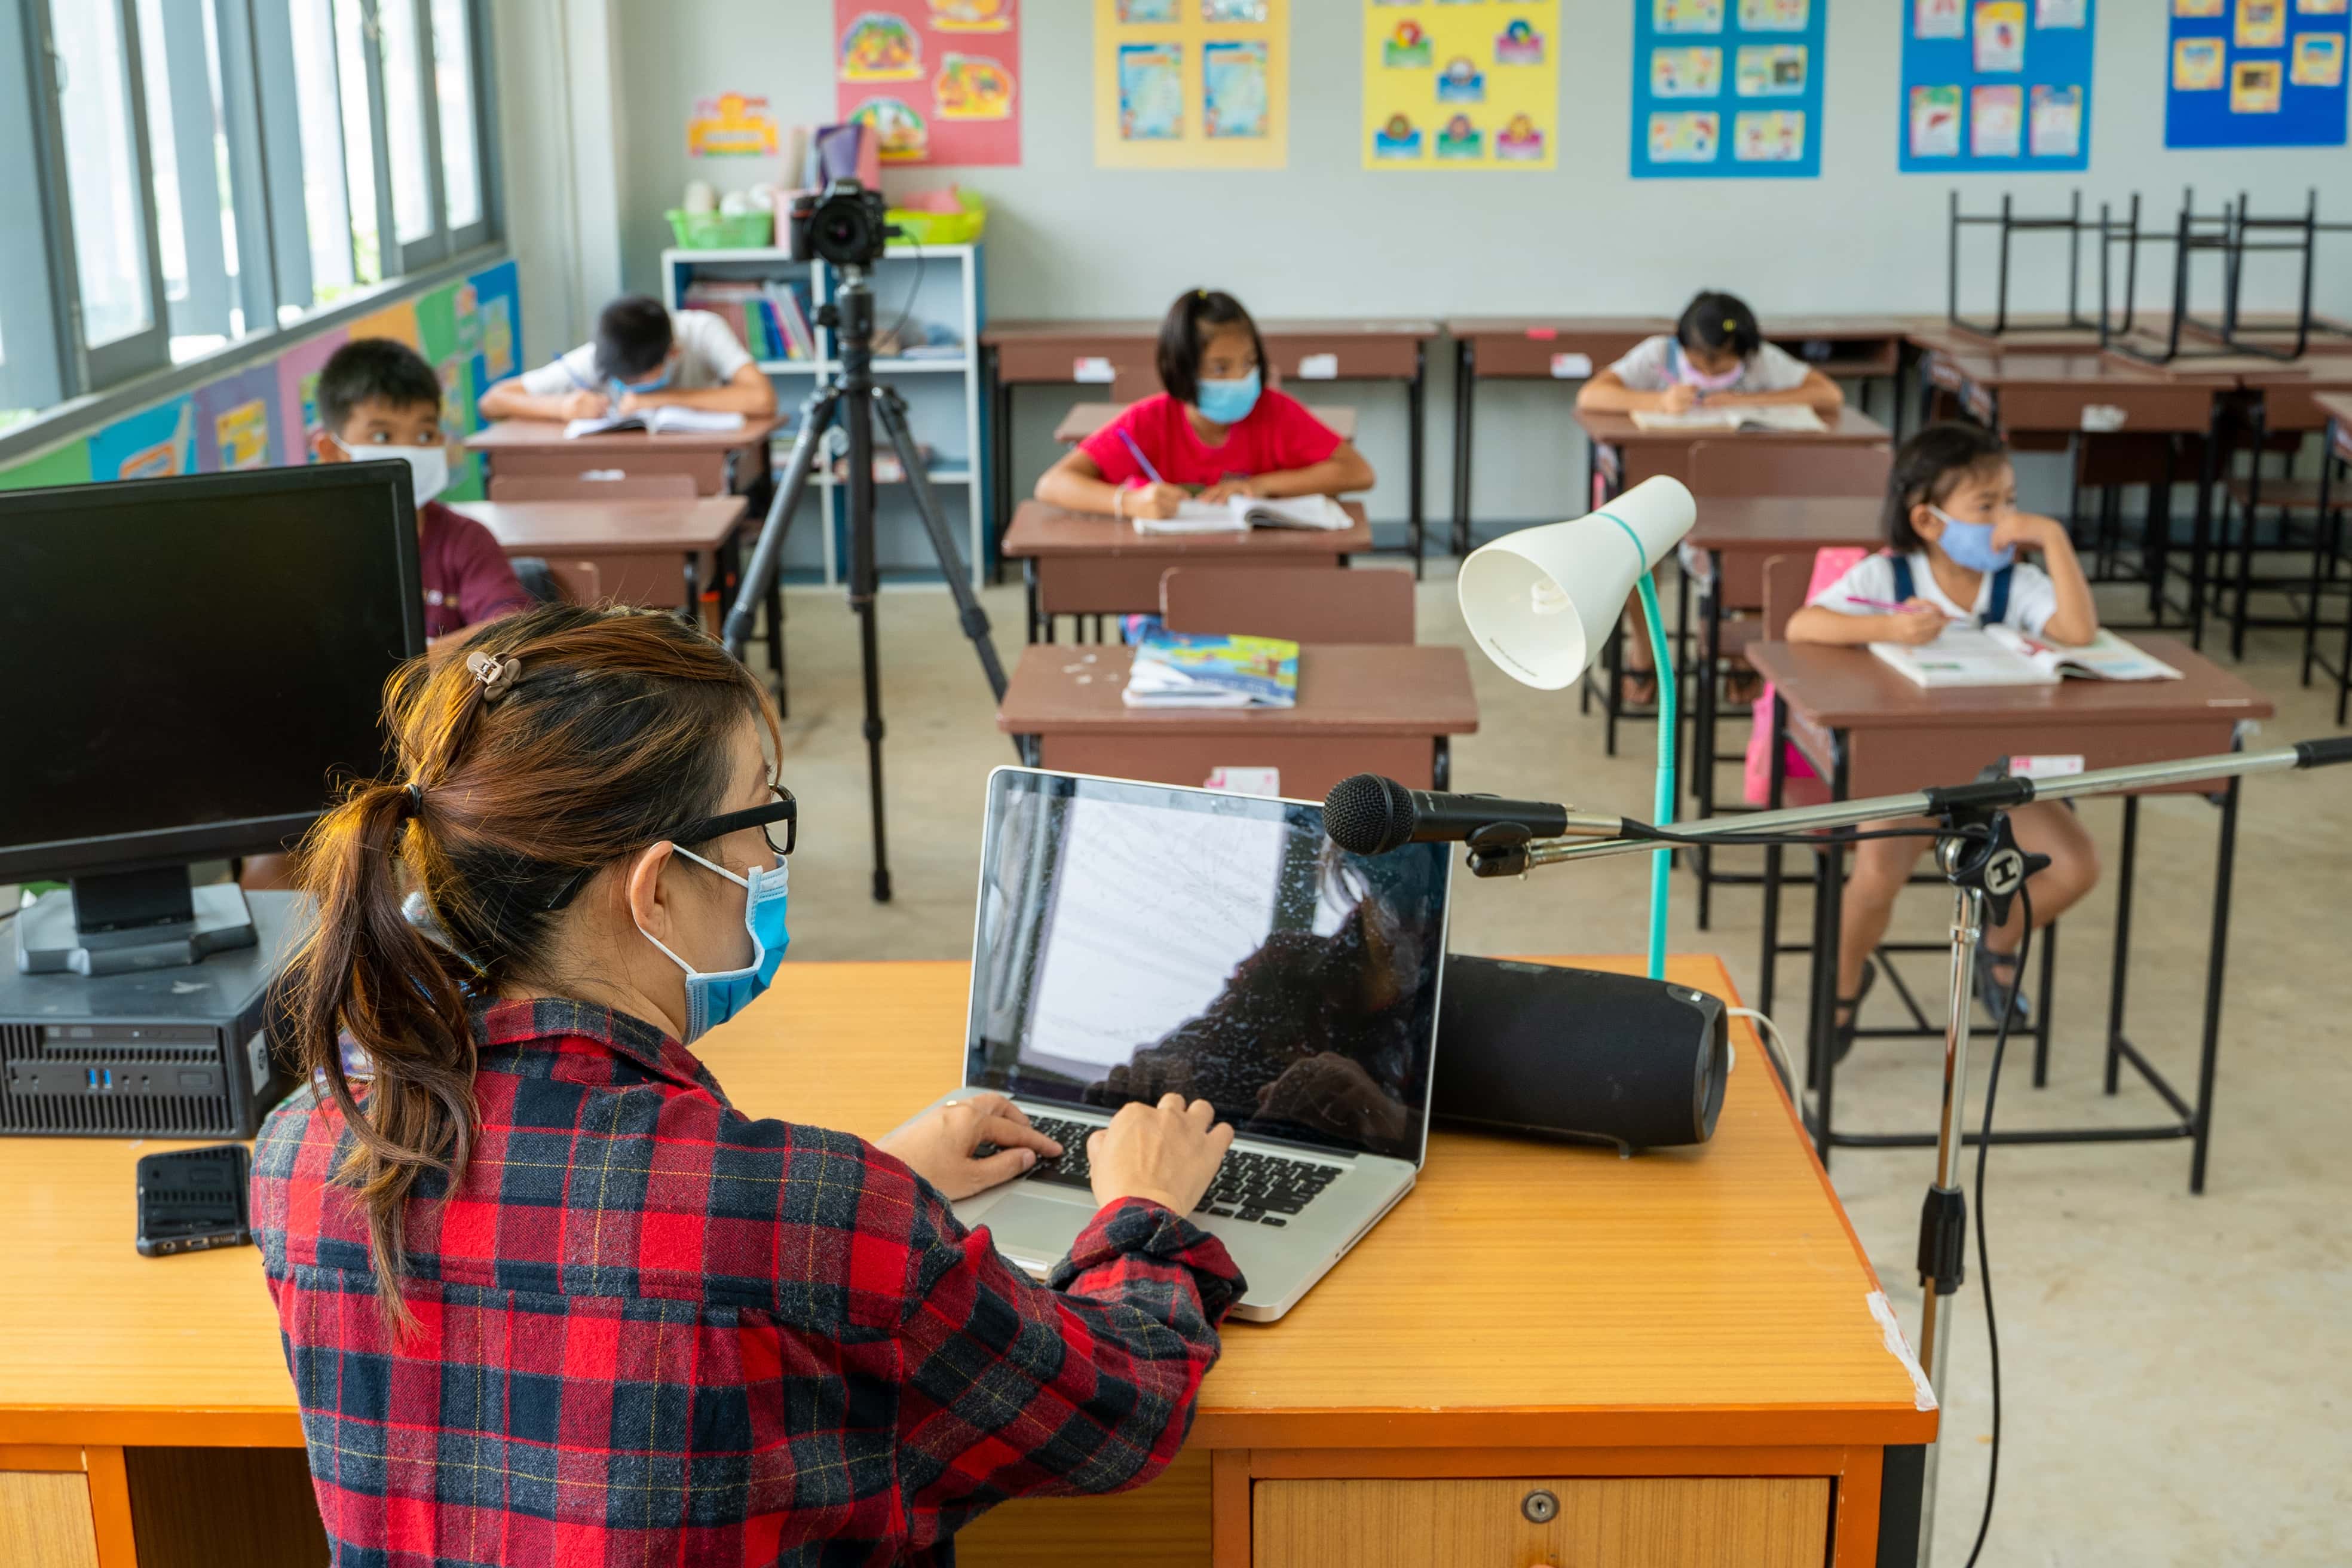 Teacher wearing protective mask to Protect Against Covid-19,Group of school kids with teacher sitting in classroom online and raising hands,Elementary school,Learning and people concept.